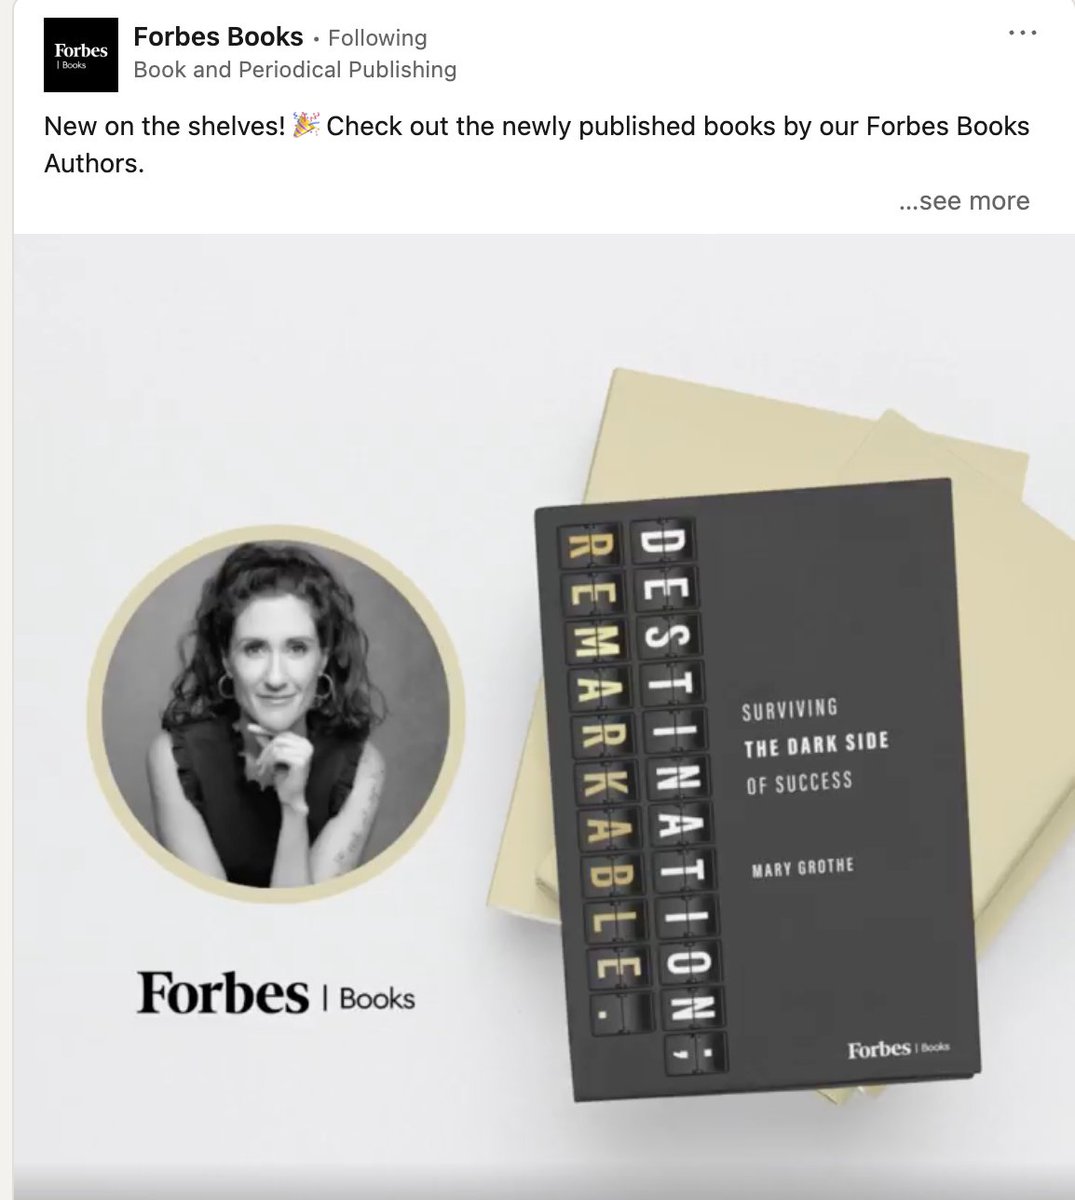 Loved every minute of working with my publisher, Forbes Books. And I appreciate the announcement of the launch!

#forbesbooks #AuthorsOfTwitter #BestSeller